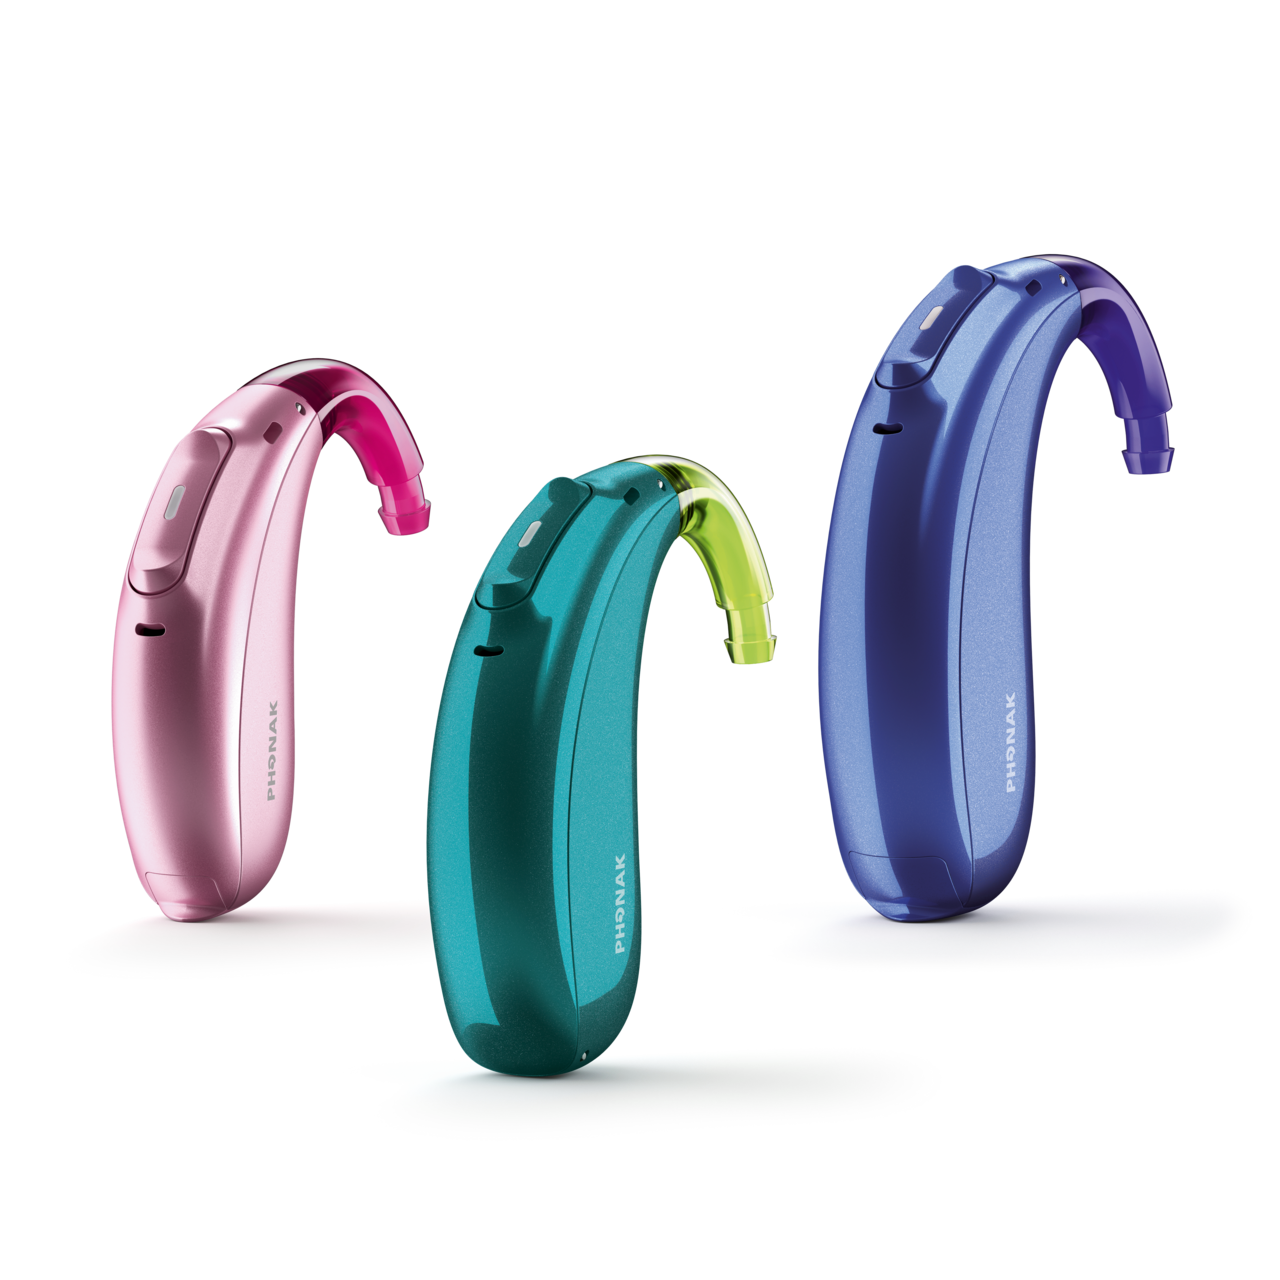 Three Phonak Sky M hearing aids in three different colors: pink, teal, royal blue.